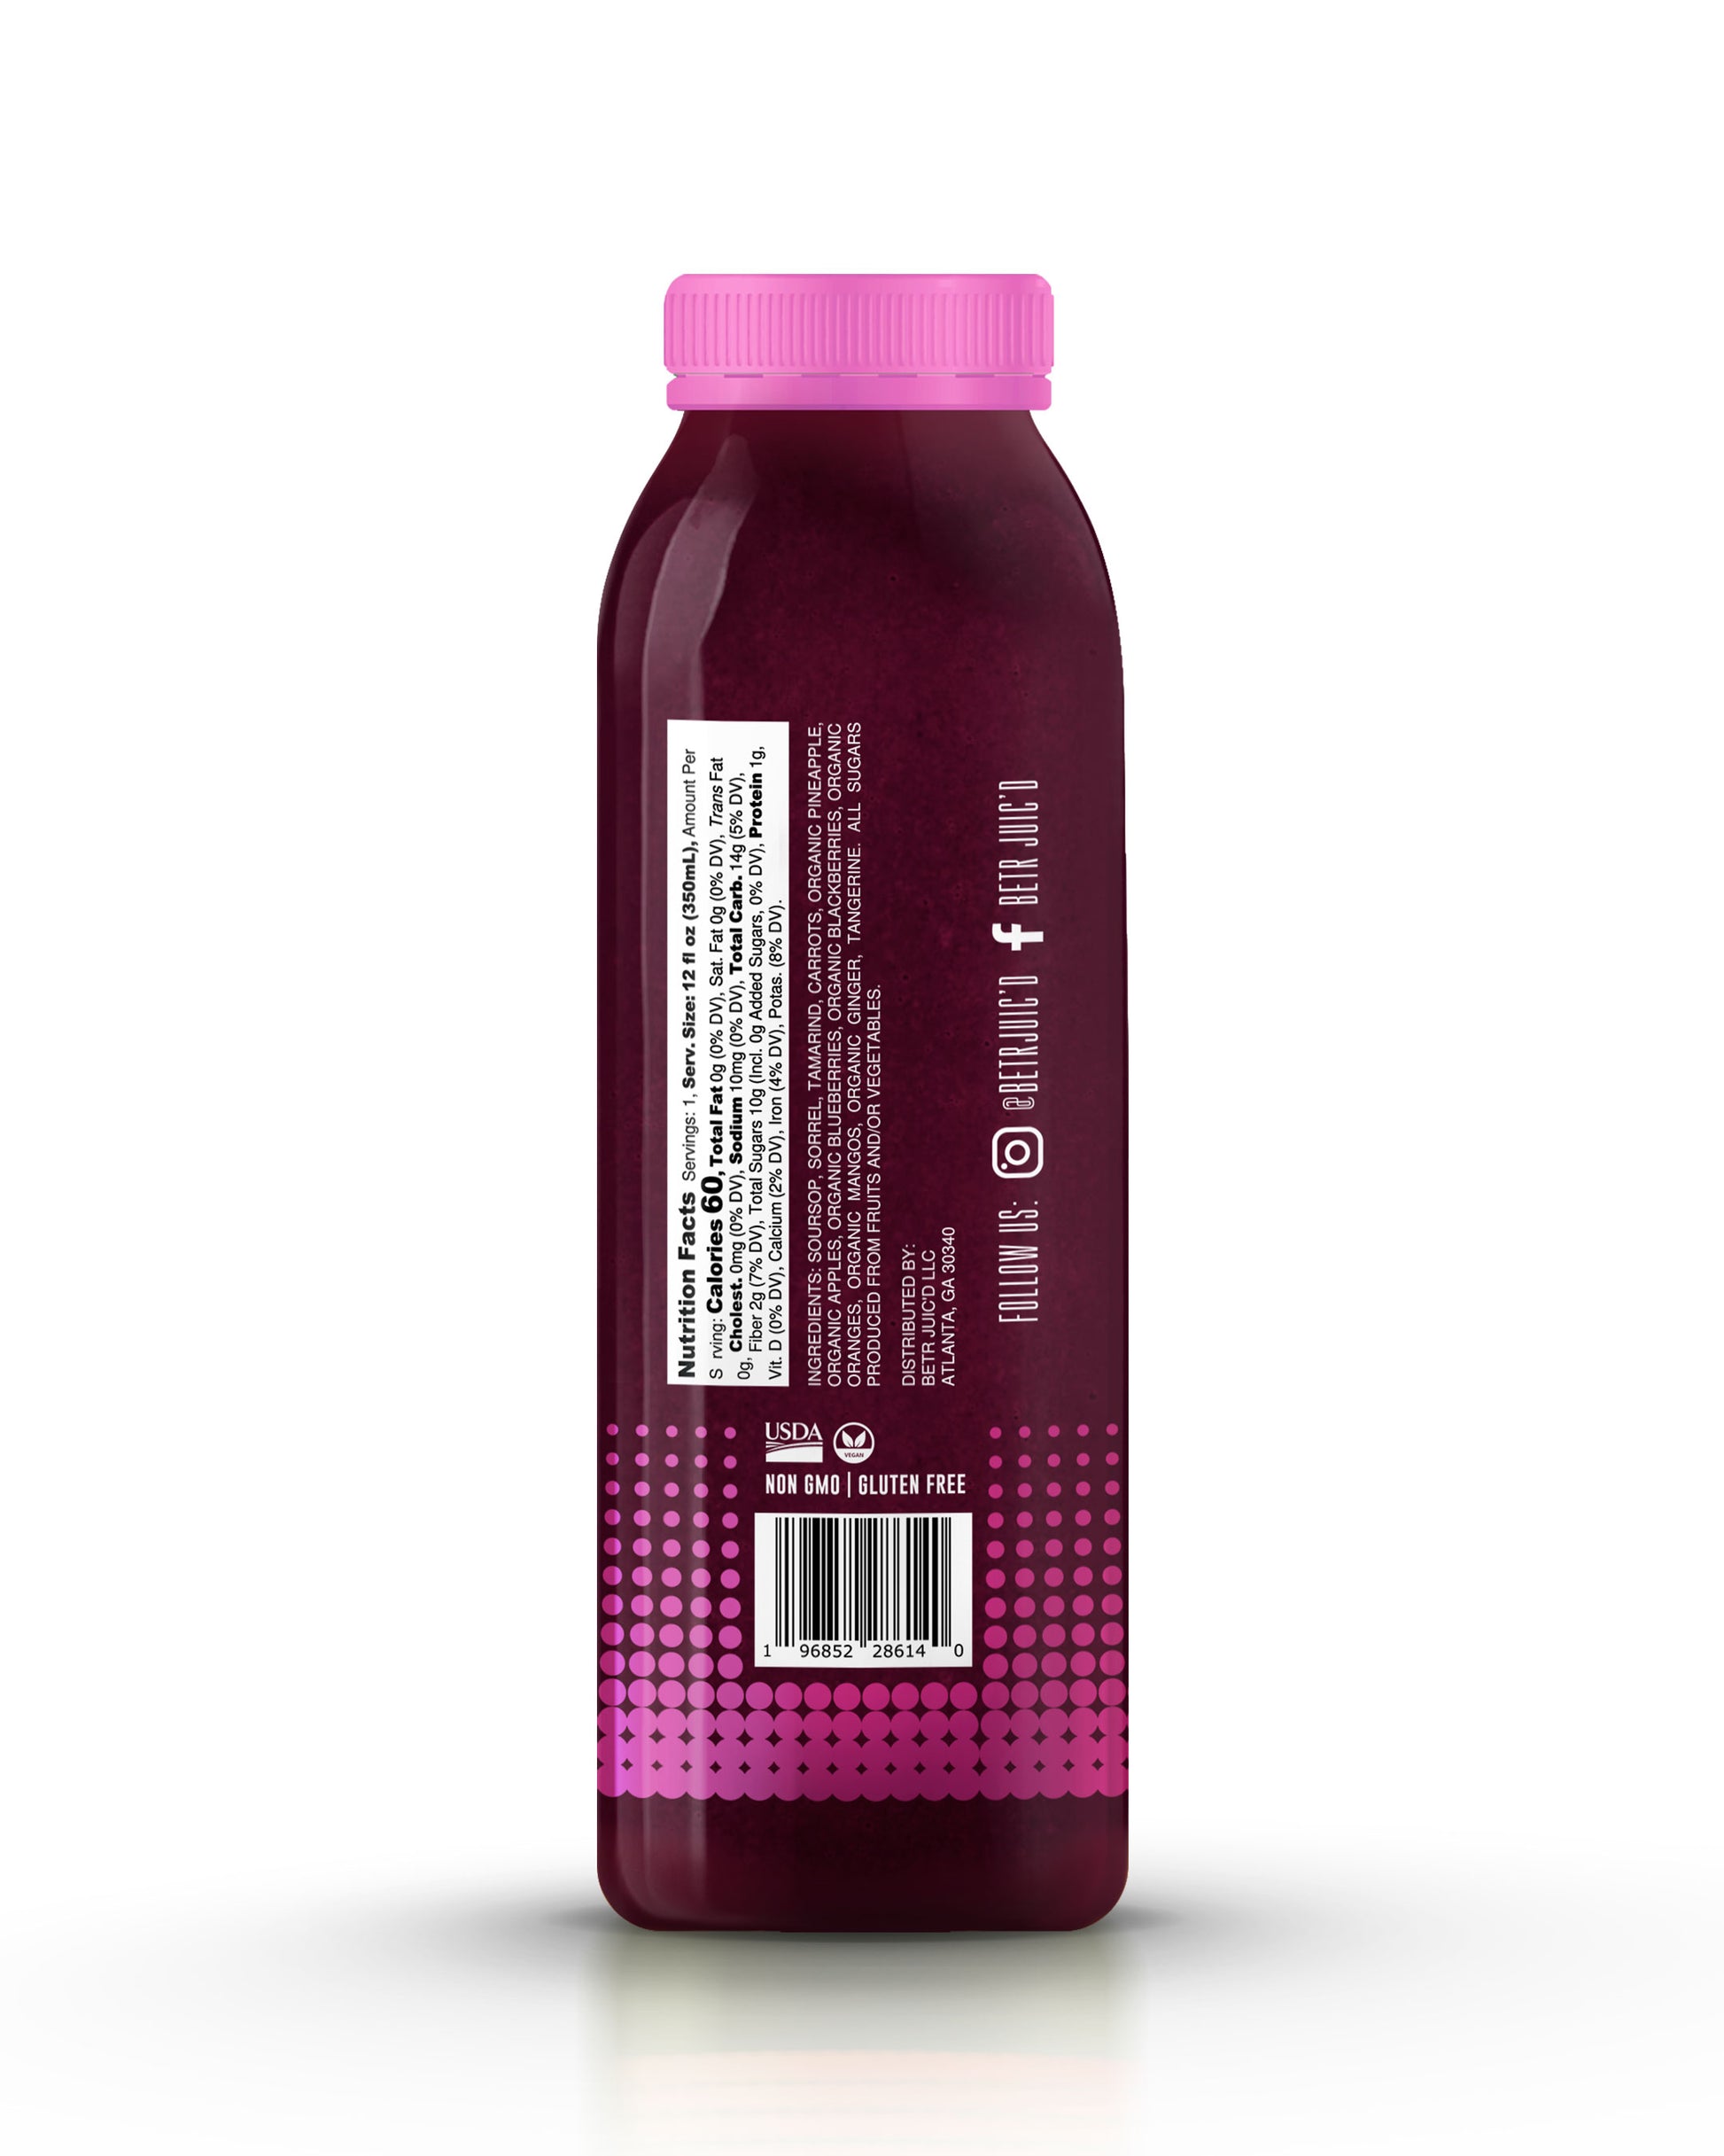 A delicious and healthy Jamaican beverage in a rich reddish-purple hue, with a fuchsia pink cap and label adorned with fuchsia pink dots. 